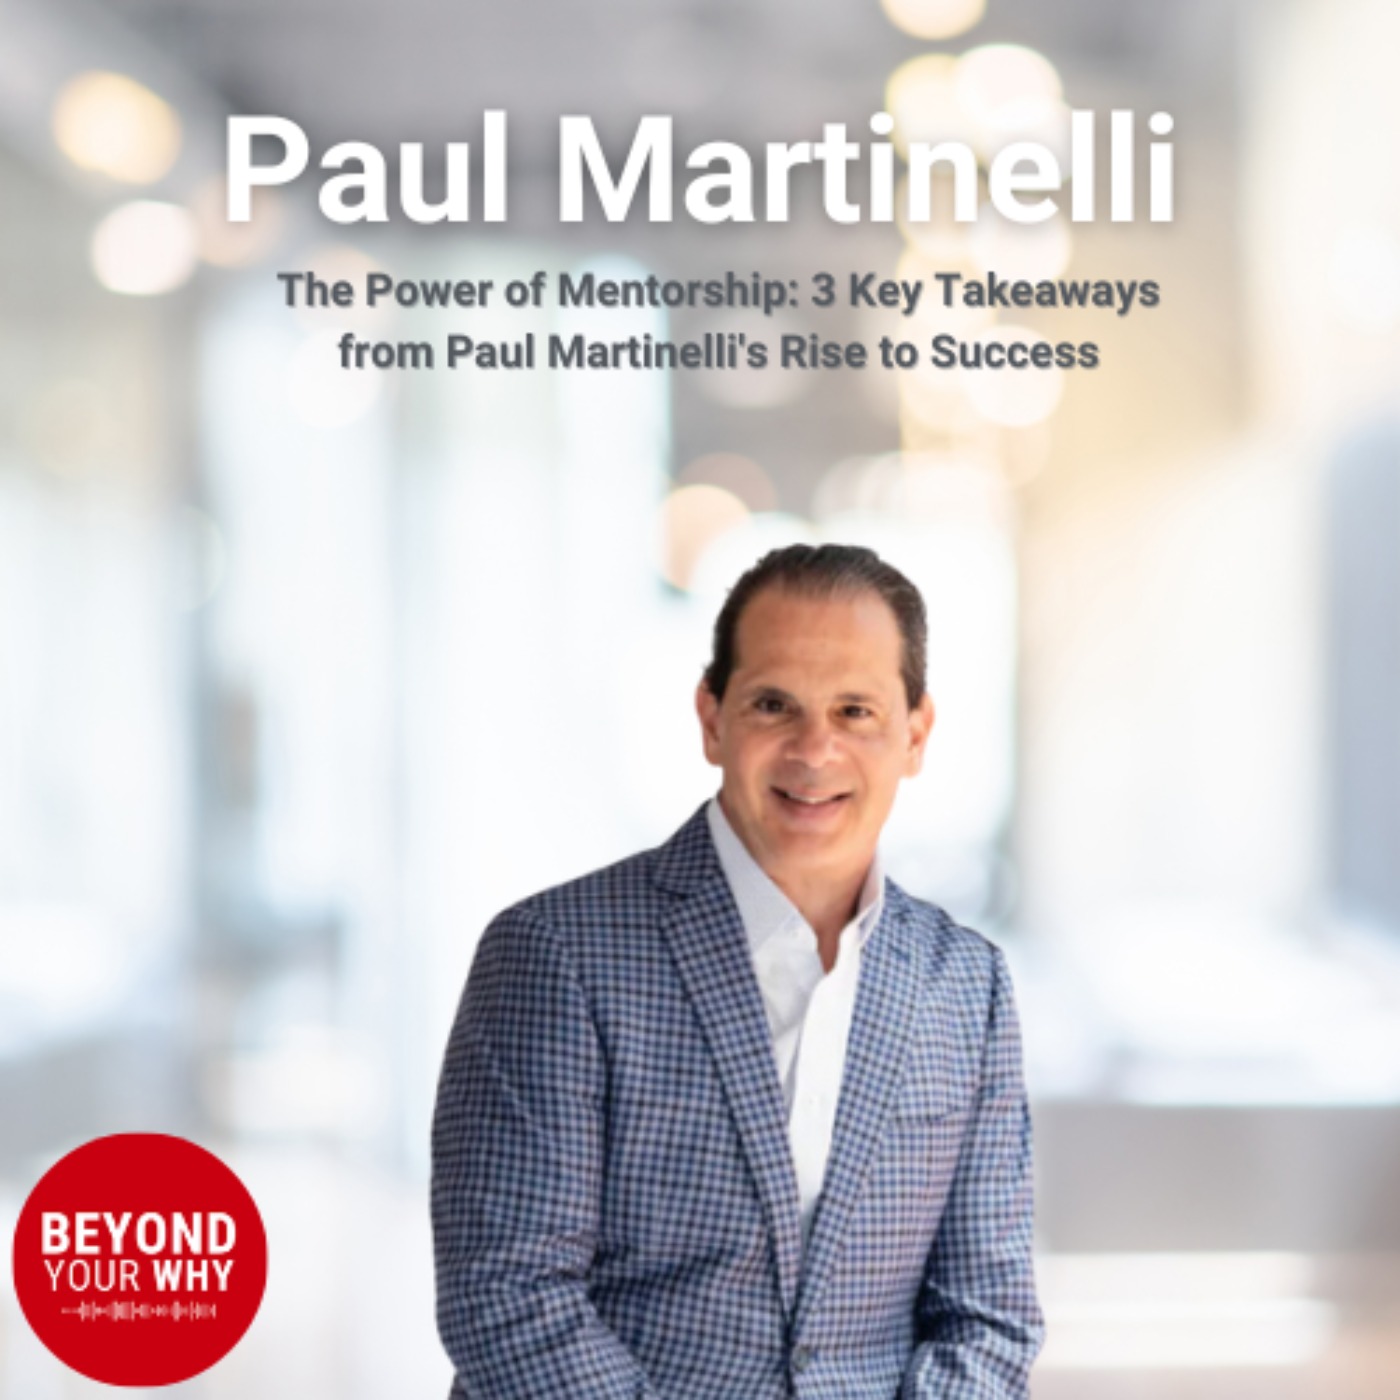 The Power of Mentorship: 3 Key Takeaways from Paul Martinelli's Rise to Success